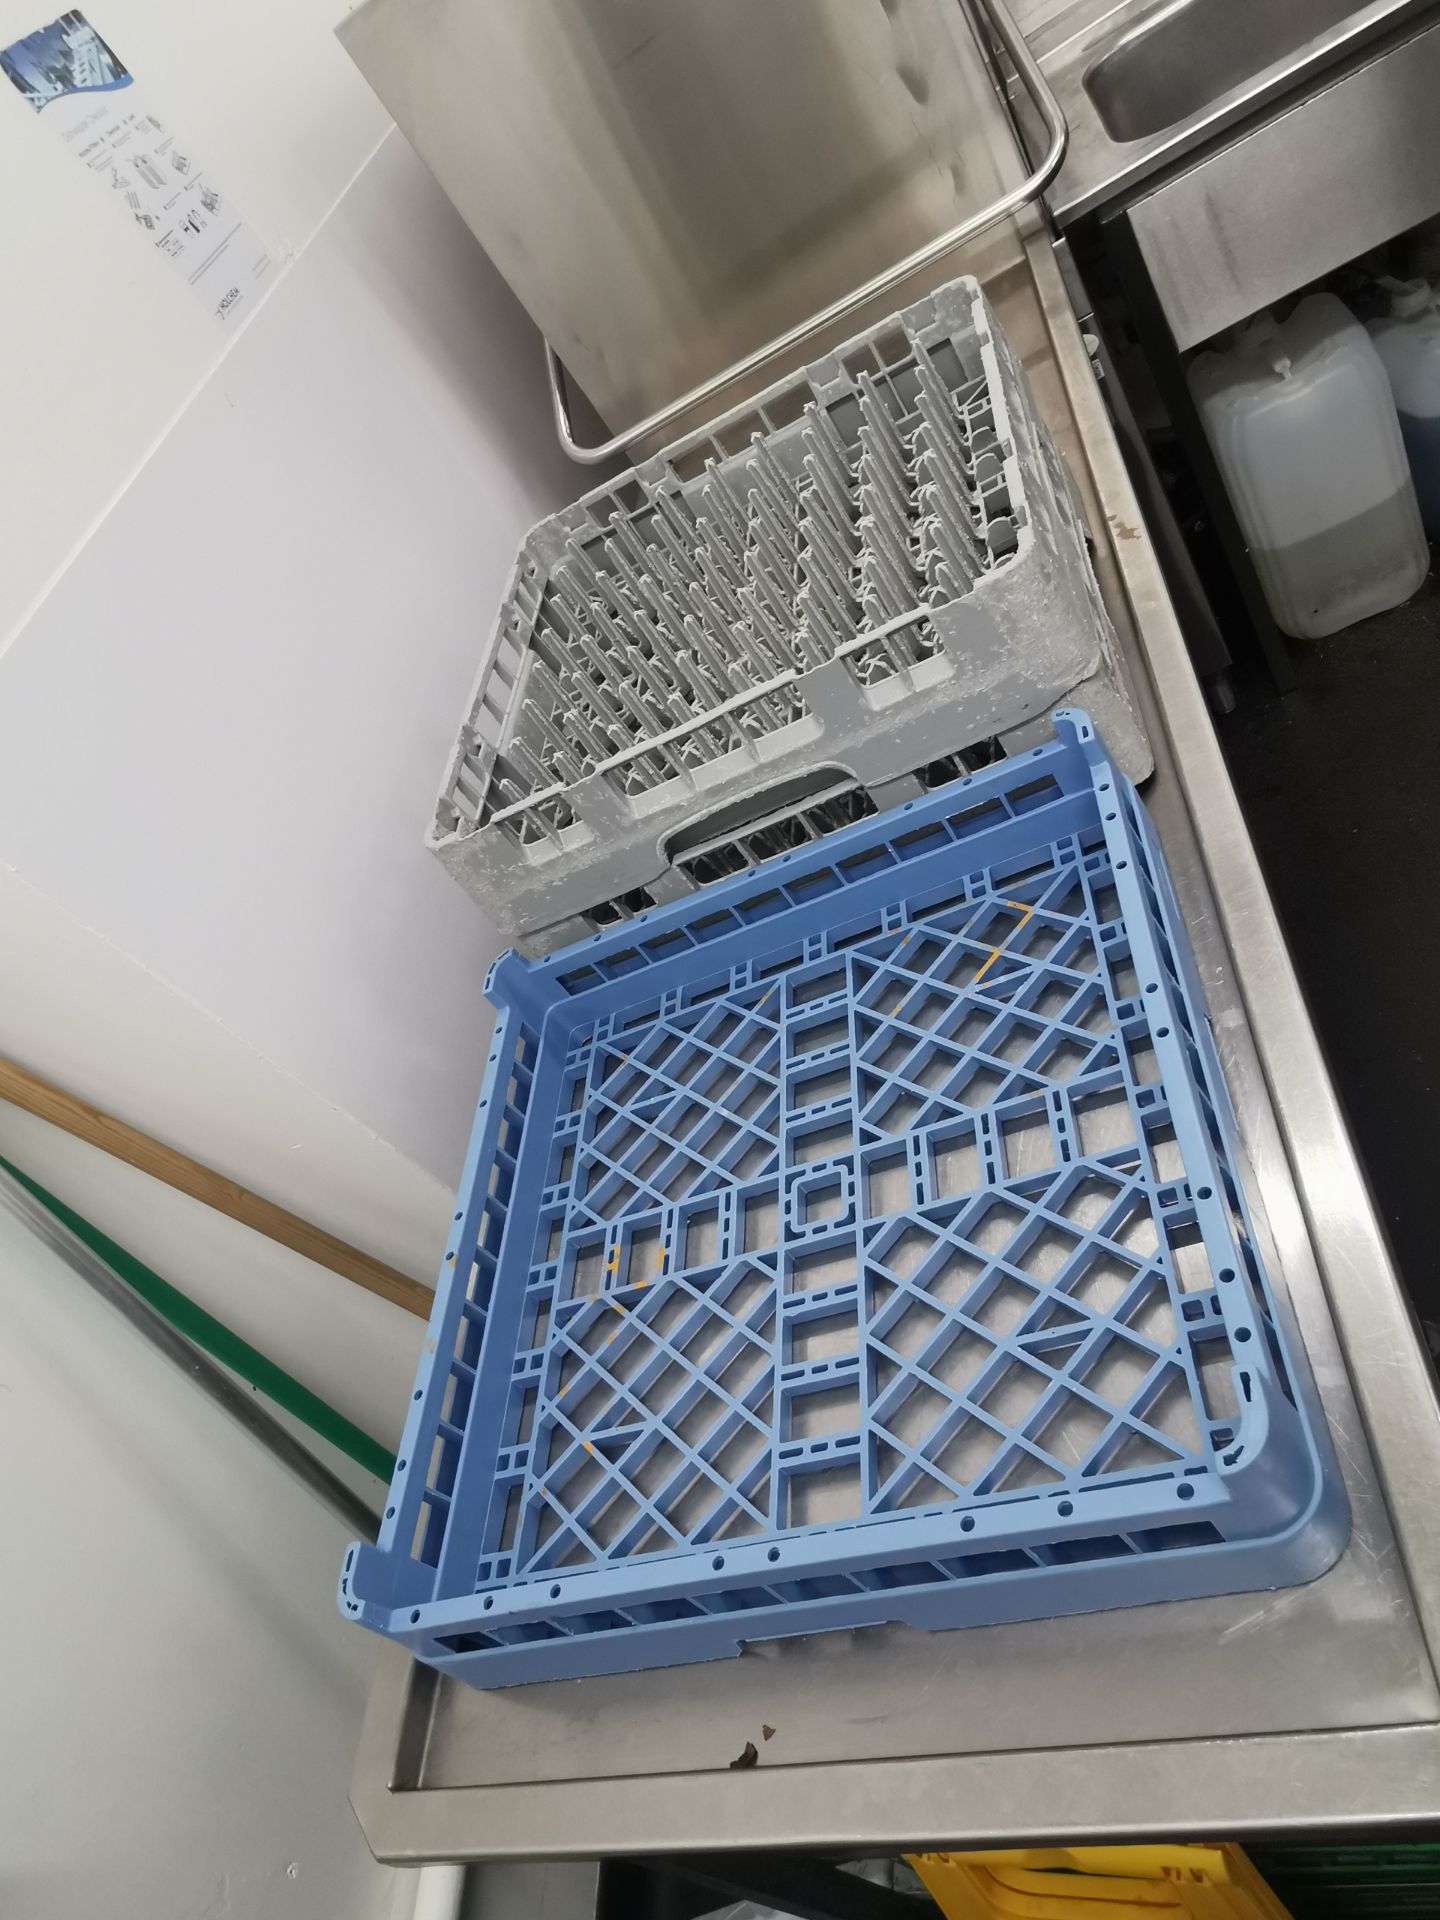 Hoonved Model CAP10E Tray feed dish washer and sta - Image 4 of 8